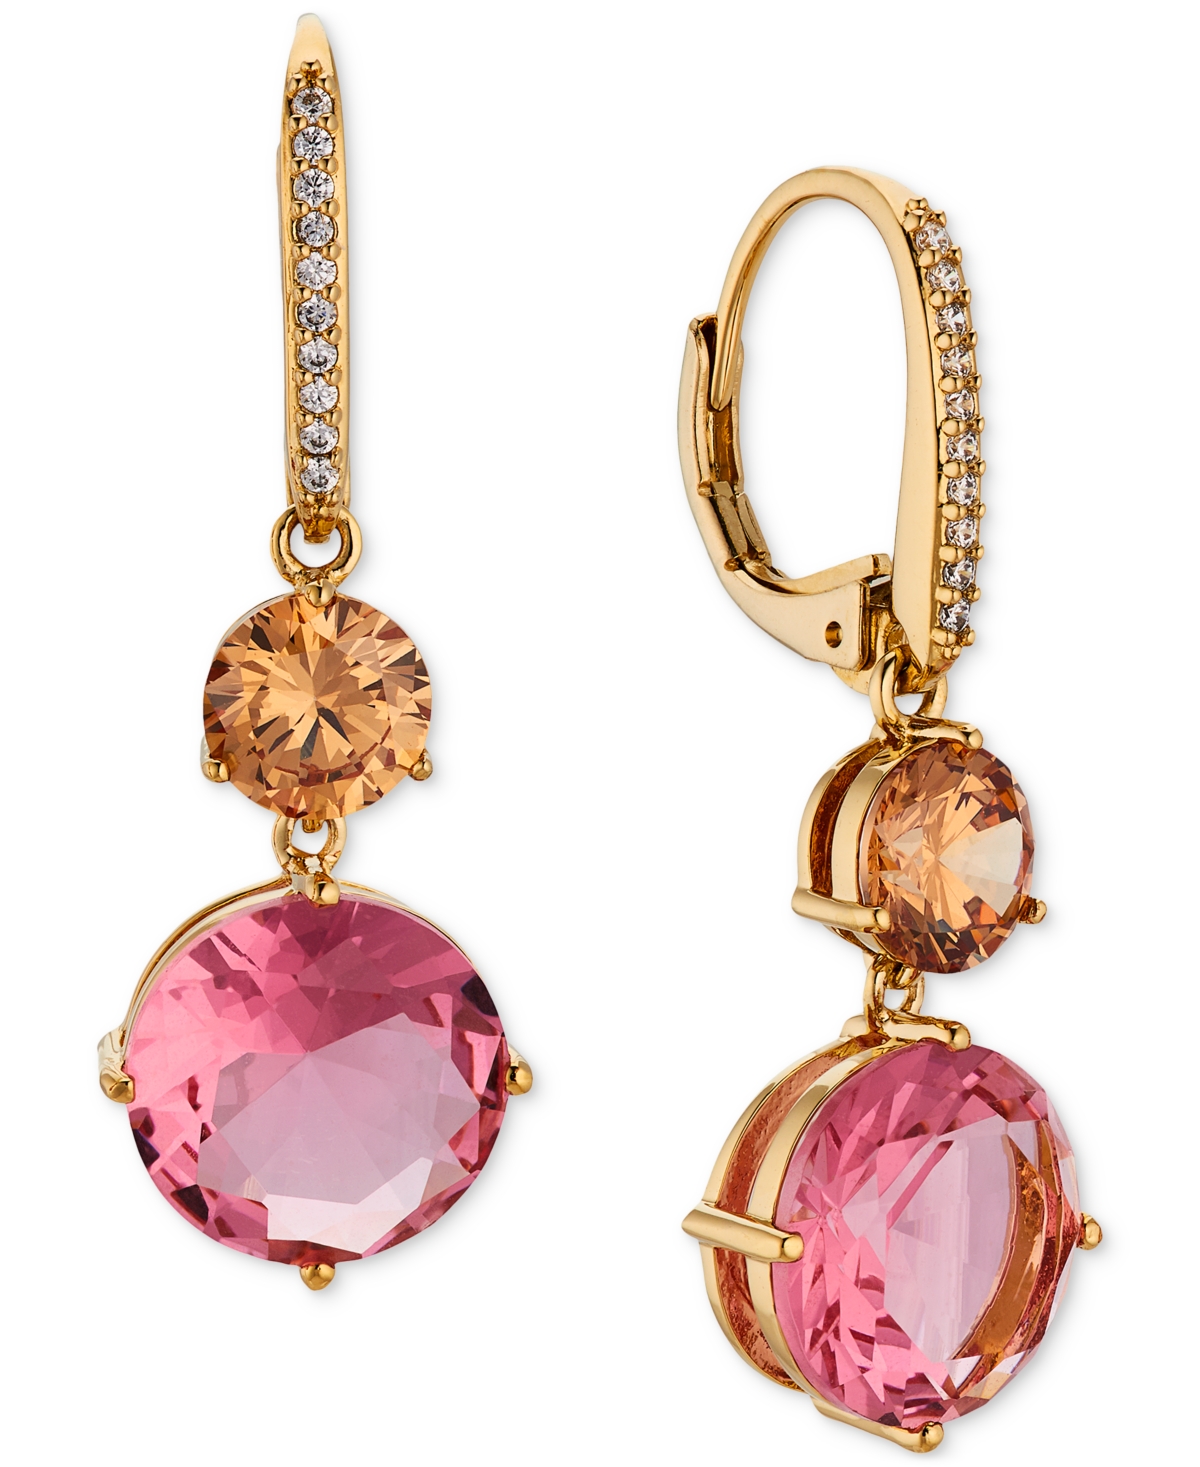 18k Gold-Plated Multicolor Cubic Zirconia Double Drop Earrings, Created for Macy's - Gold